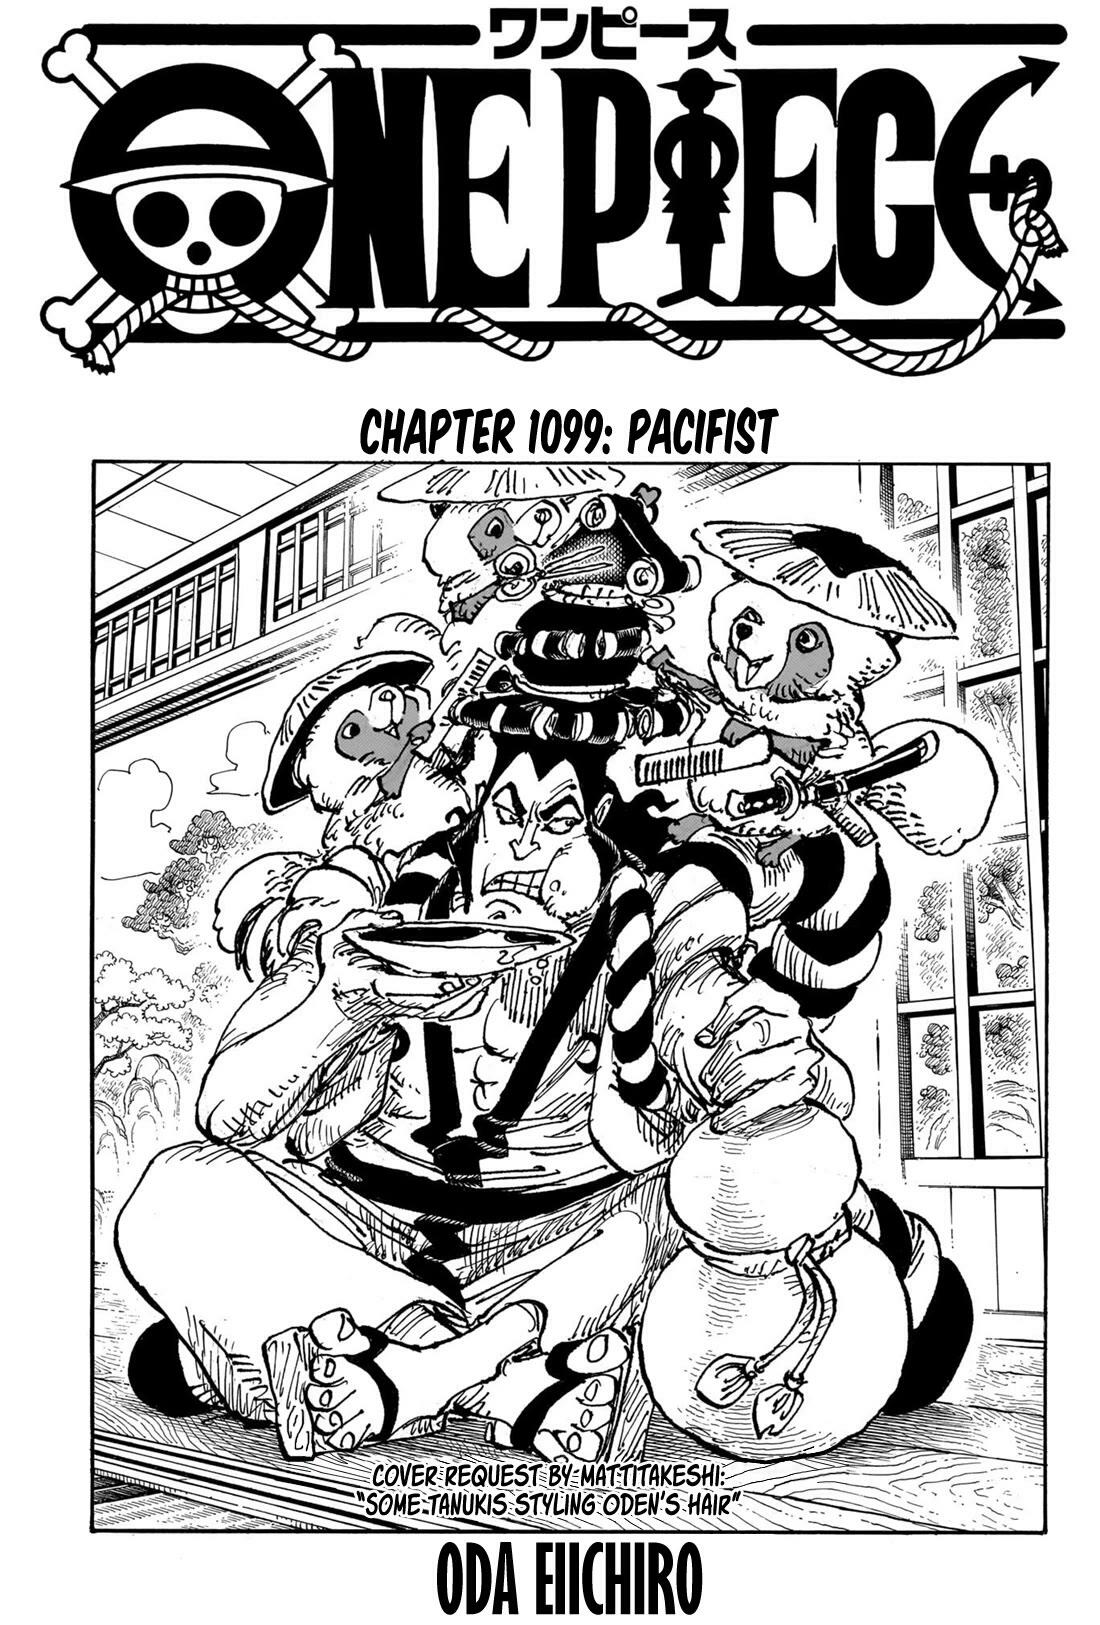 Spoiler - One Piece Chapter 1034 Spoiler Summaries and Images, Page 2